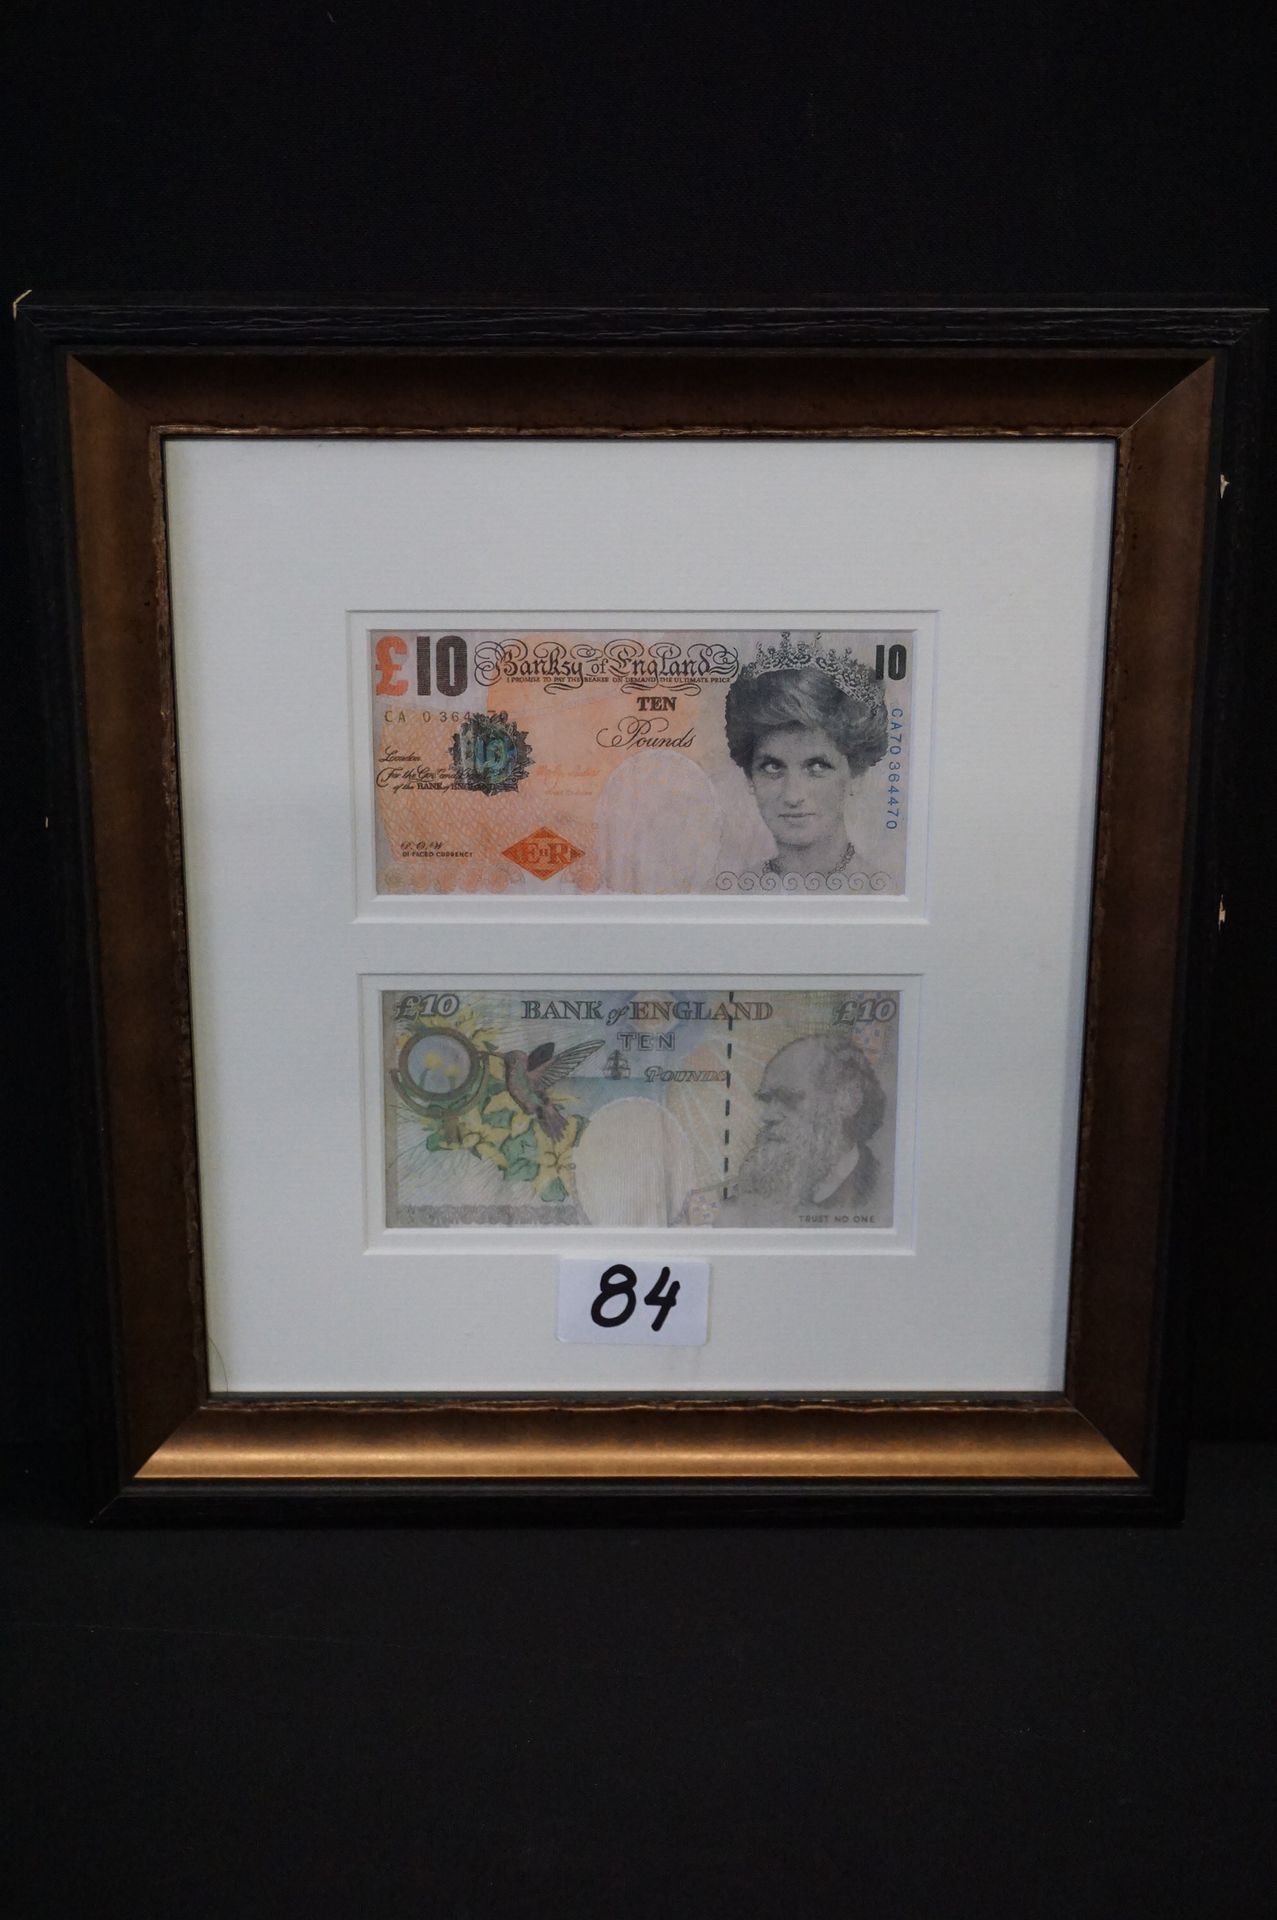 BANKSY "DI FACED TENNER" - Doble offset